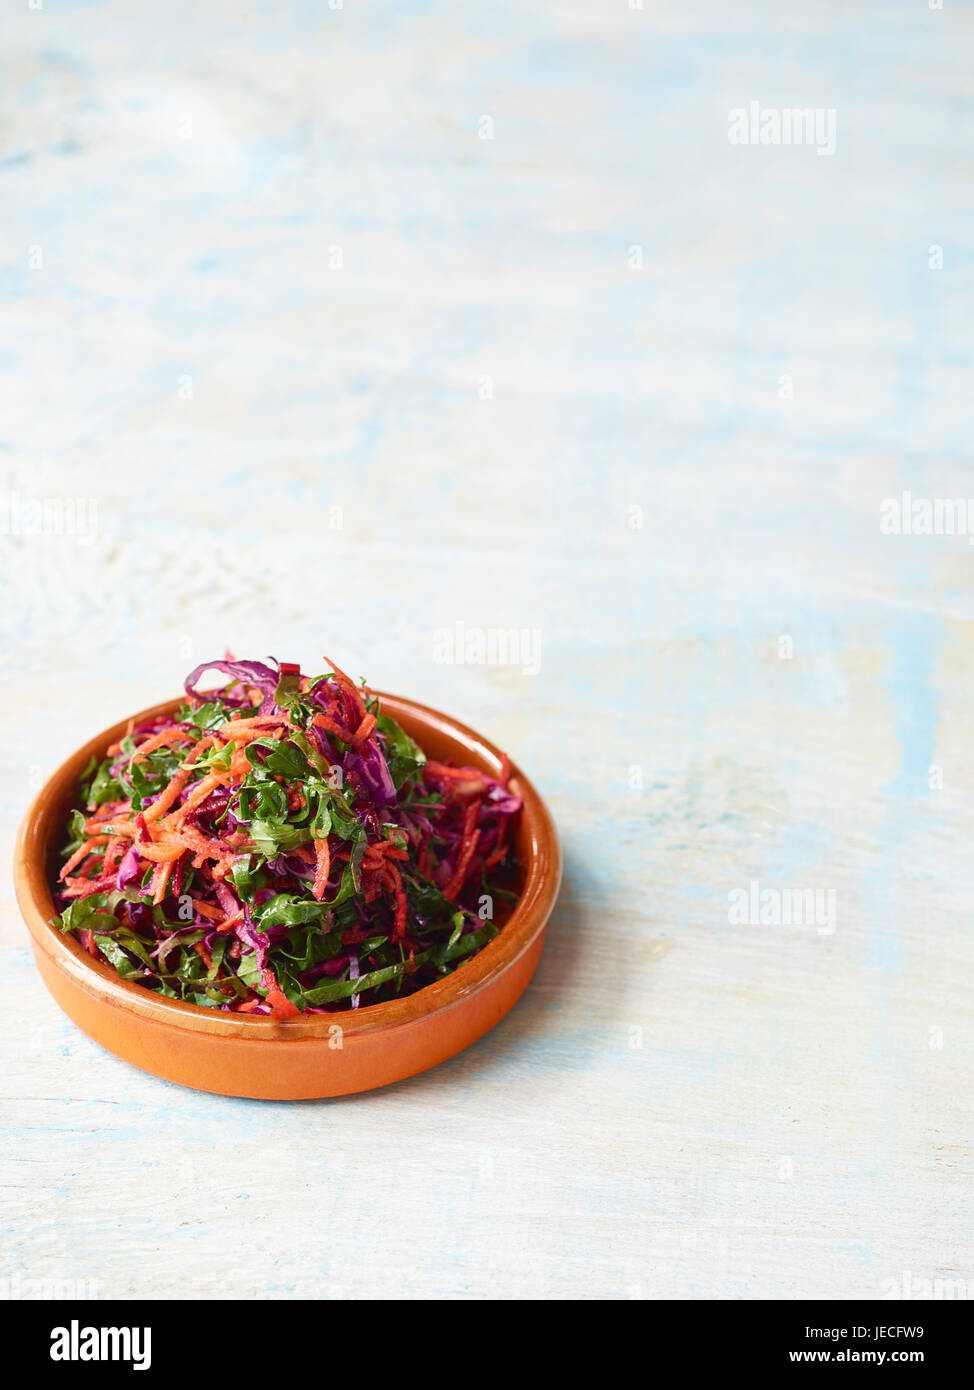 beetroot,carrot and kale freshly made slaw Stock Photo